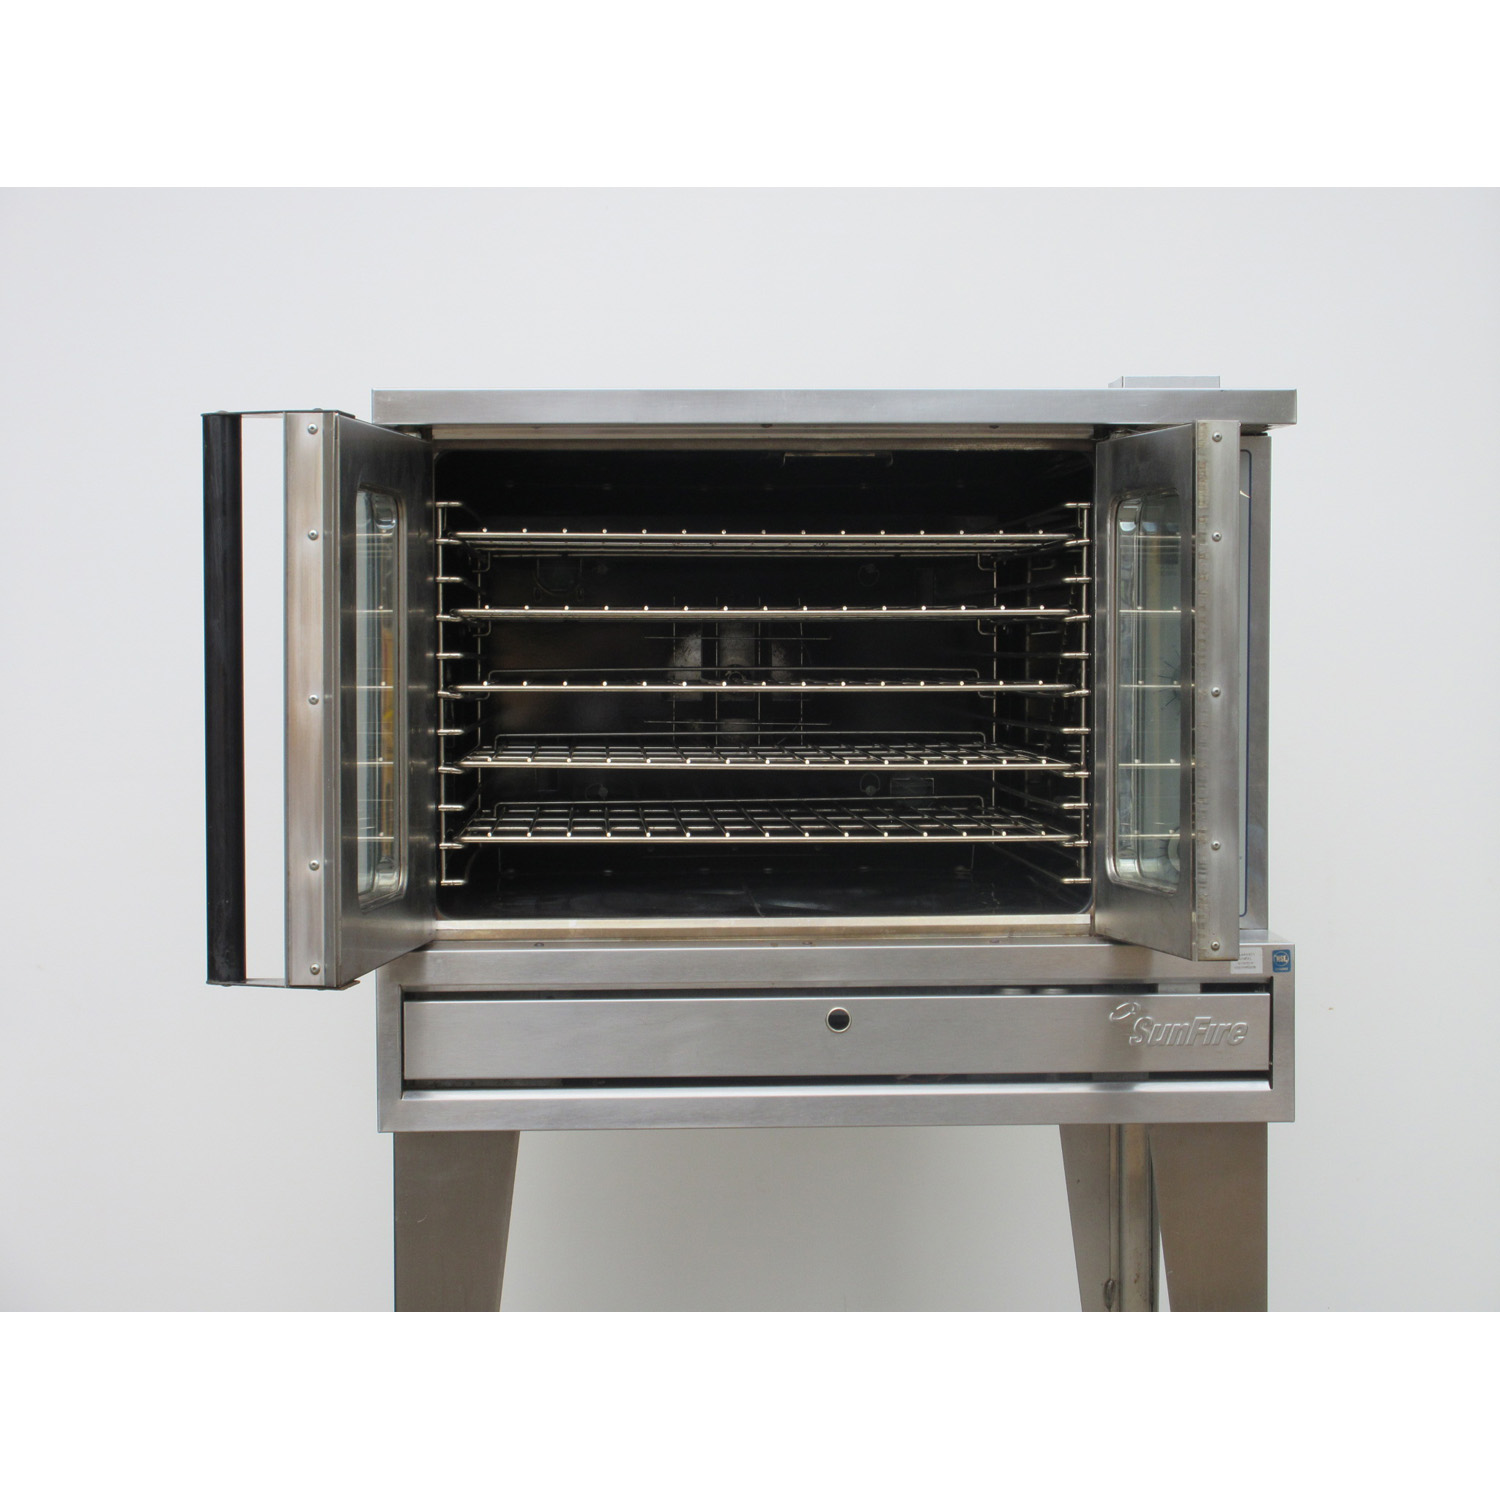 Sunfire SDG-1 Convection Gas Oven, Used Great Condition image 1